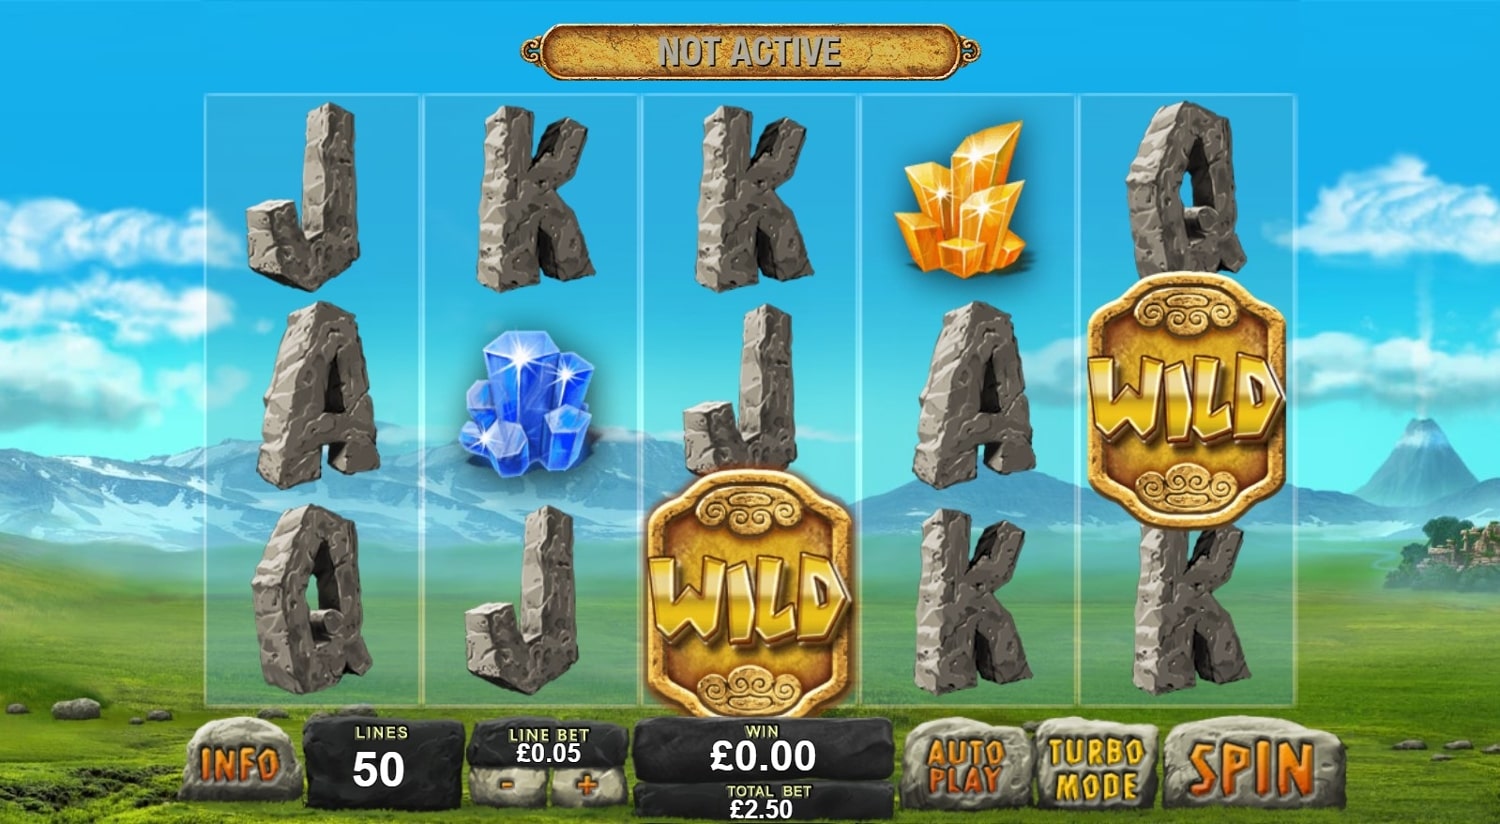 Jackpot Giant Free Spins